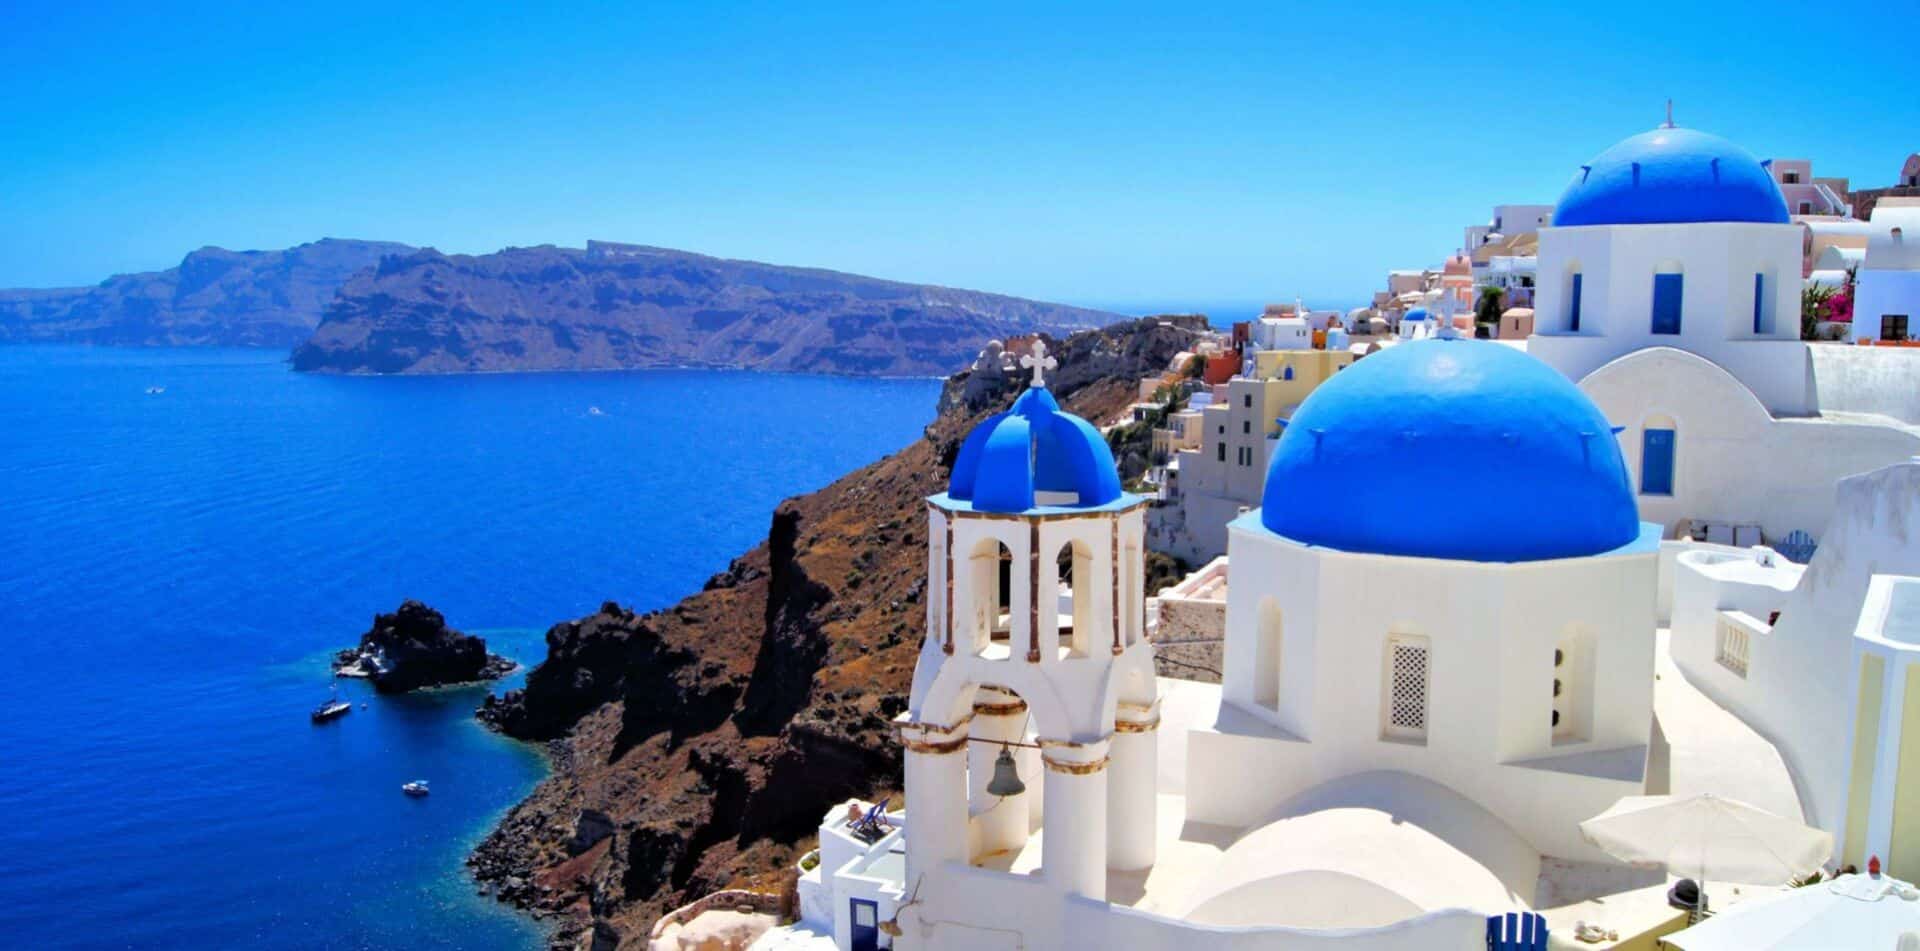 A view of the ocean from Santorini, Greece